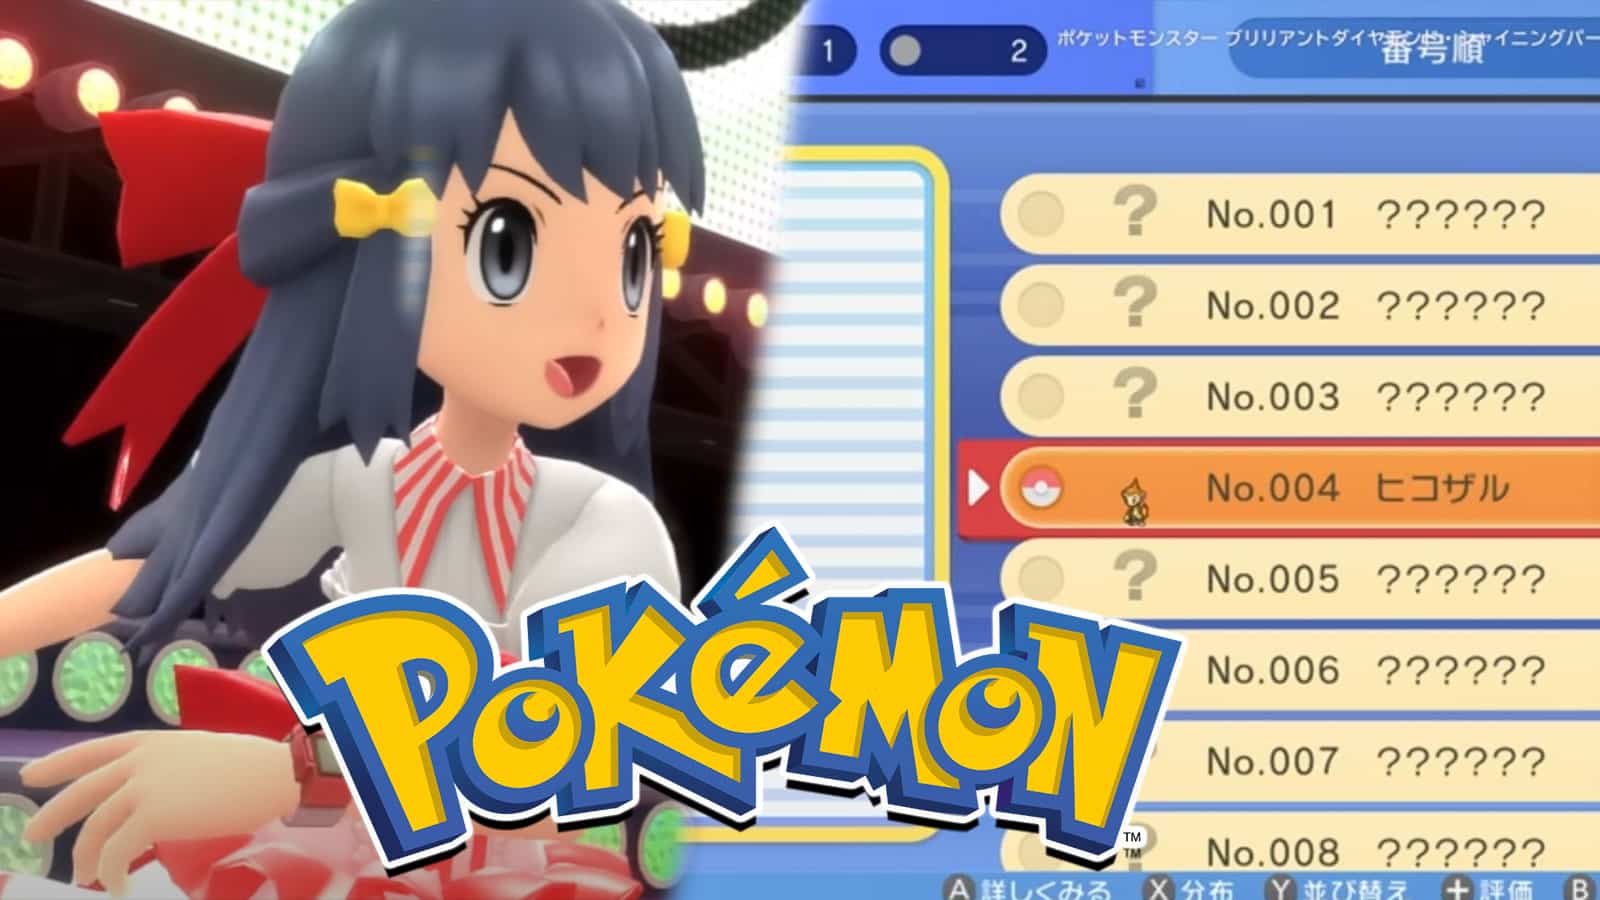 5 Hints 'Pokemon Diamond' And 'Pearl' Are Being Remade After